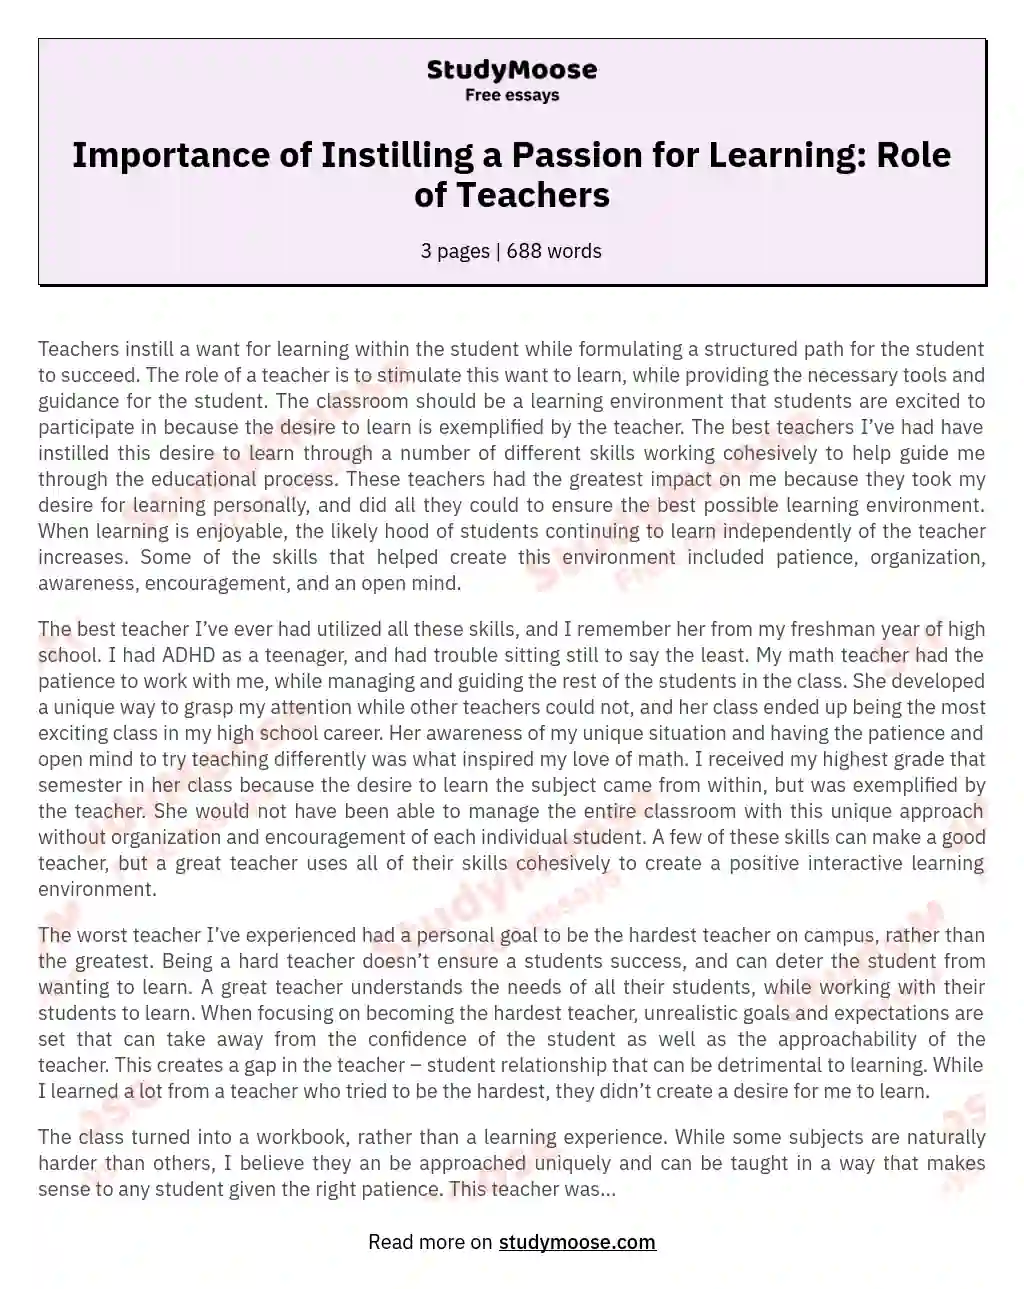 Importance of Instilling a Passion for Learning: Role of Teachers essay